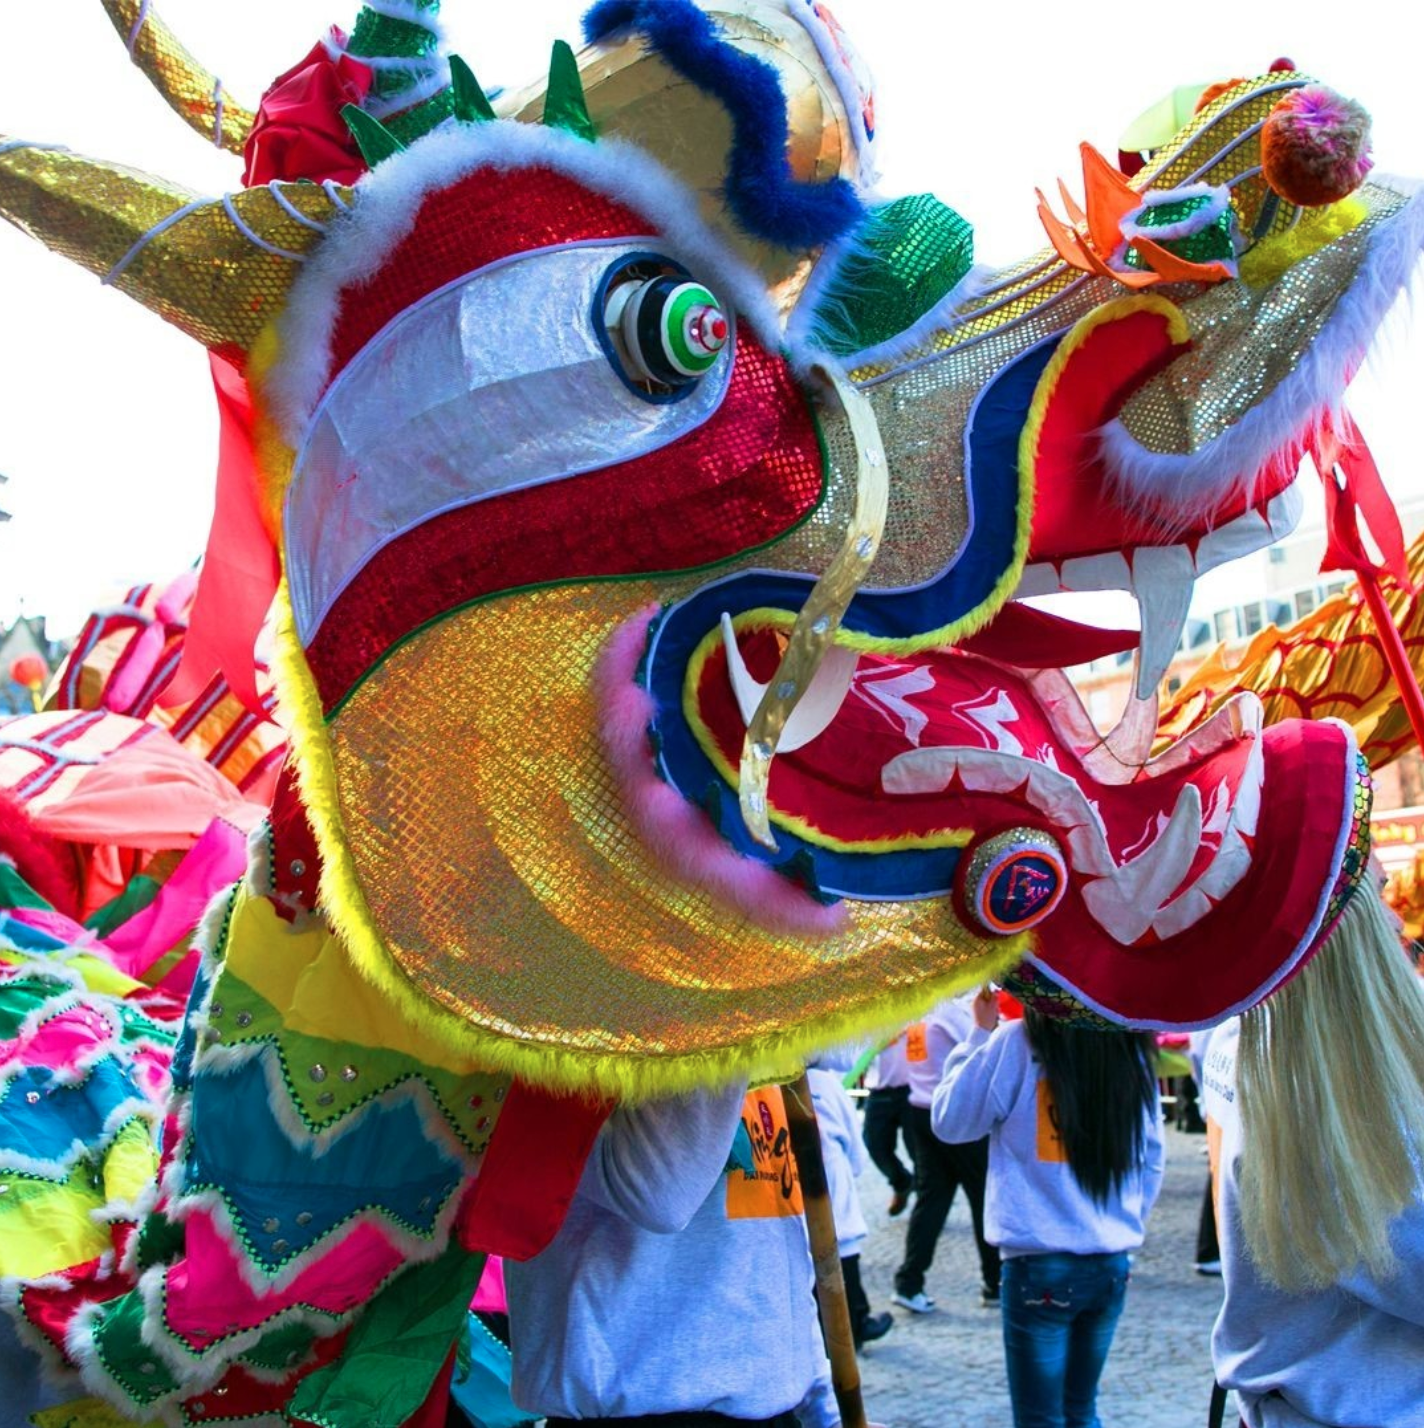 All the celebrations lined up for Chinese New Year 2022 in Manchester, The Manc